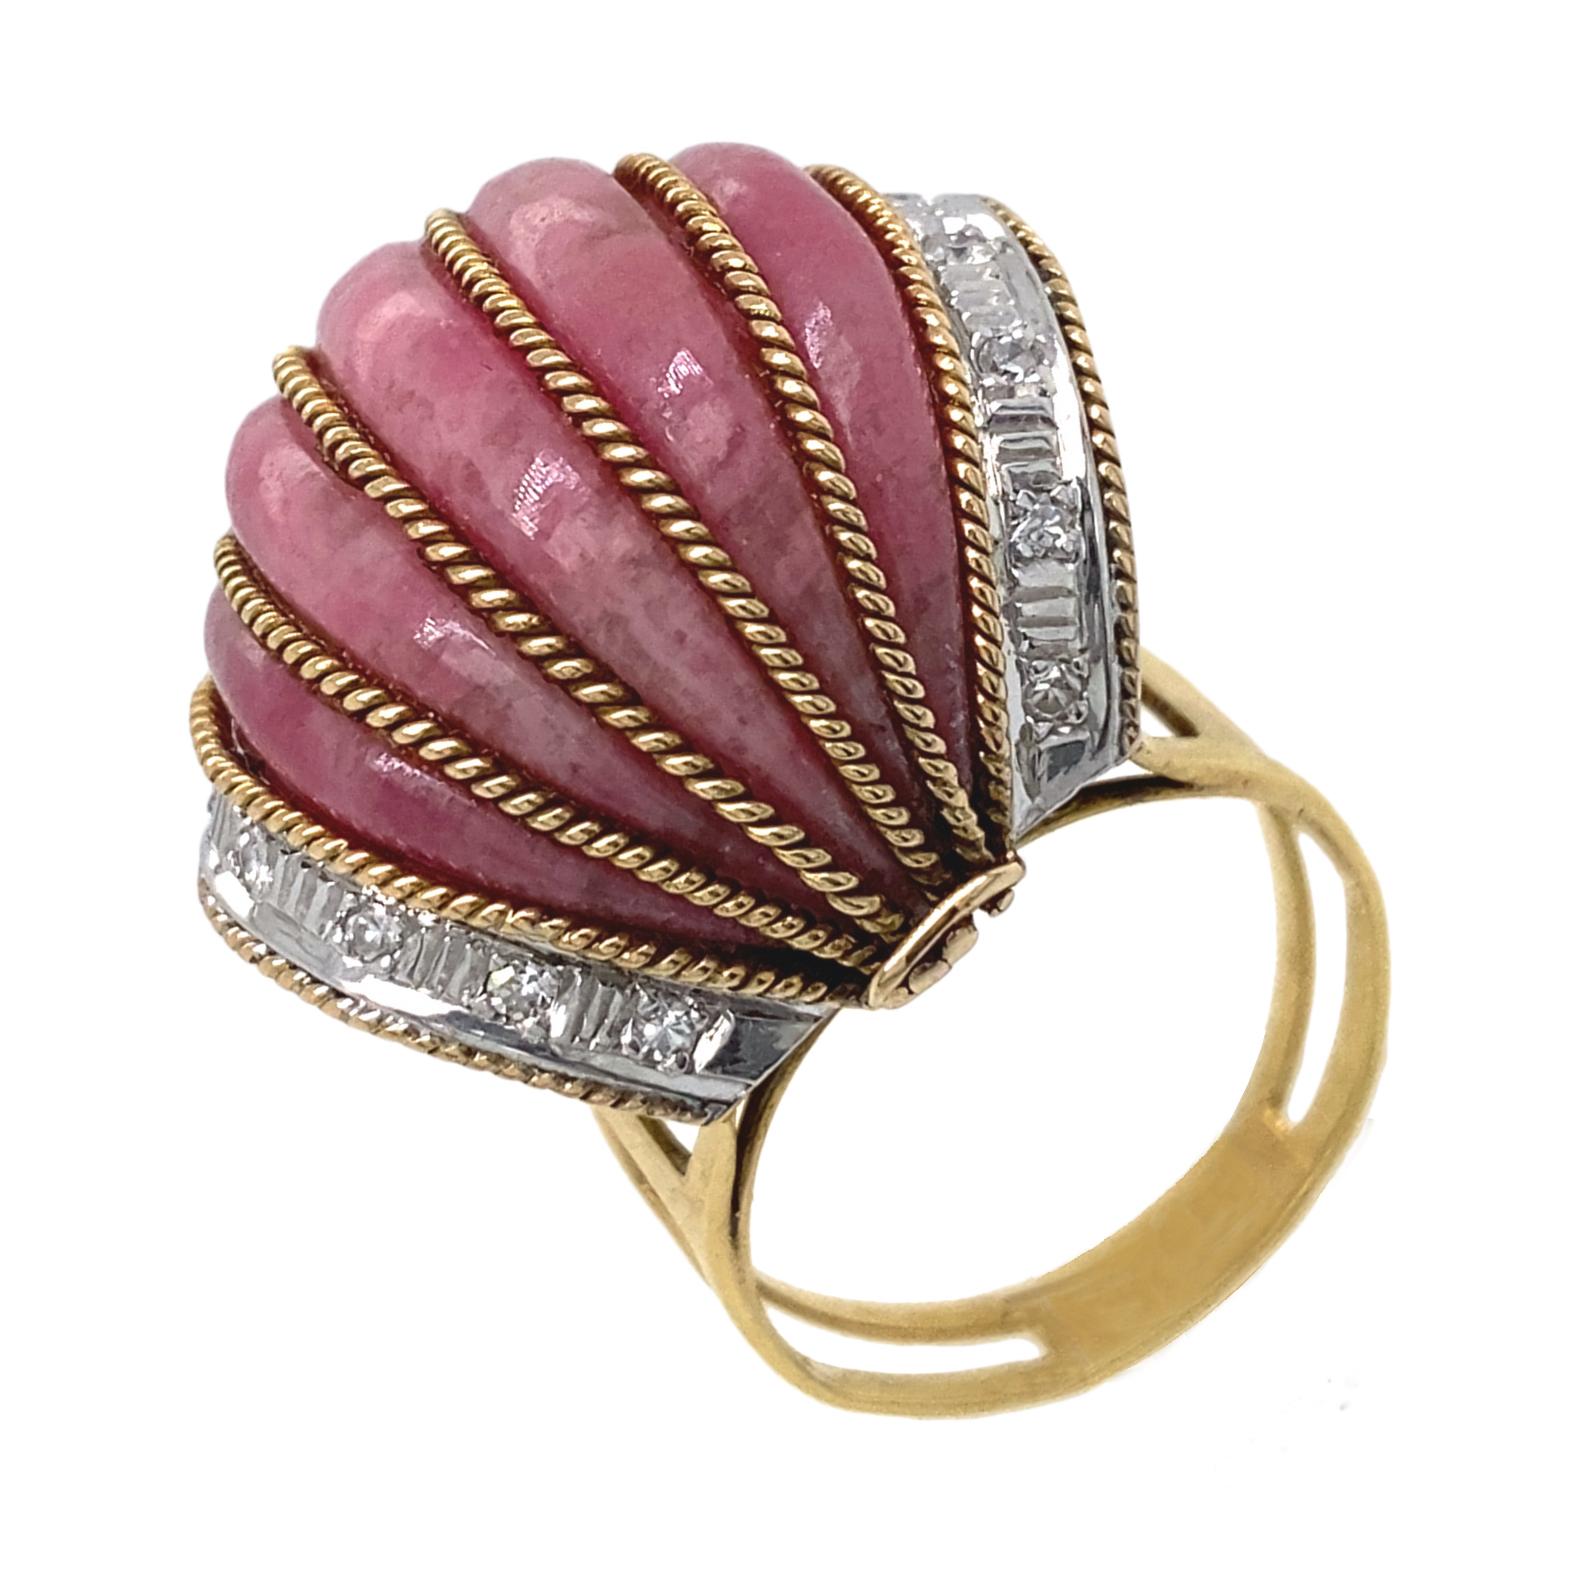 Rhodochrosite Bombe Cocktail Ring in Yellow Gold with Diamonds, Circa 1950